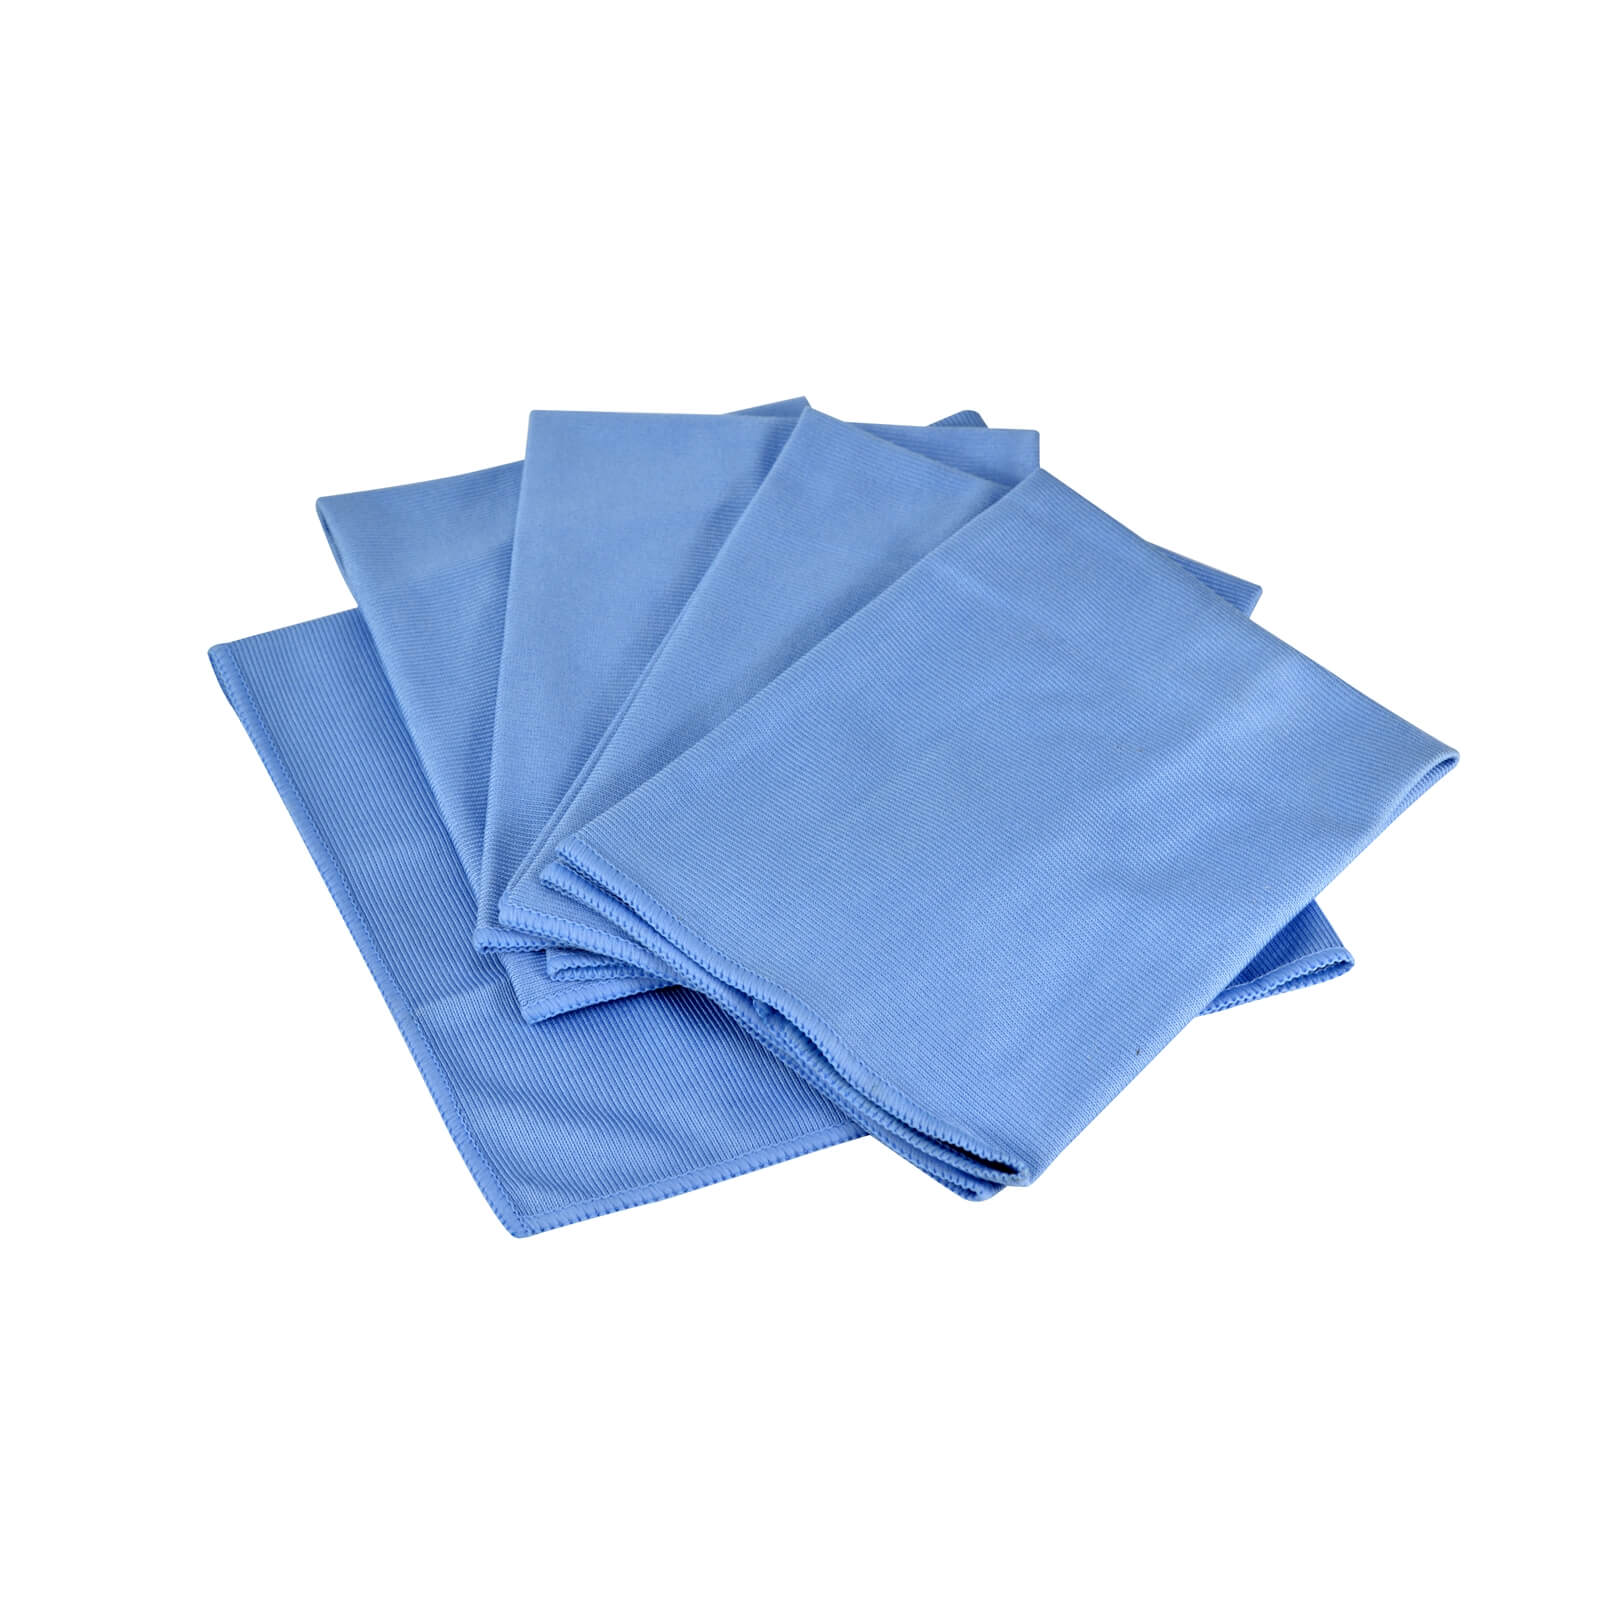 5 pack of glass cleaning cloths